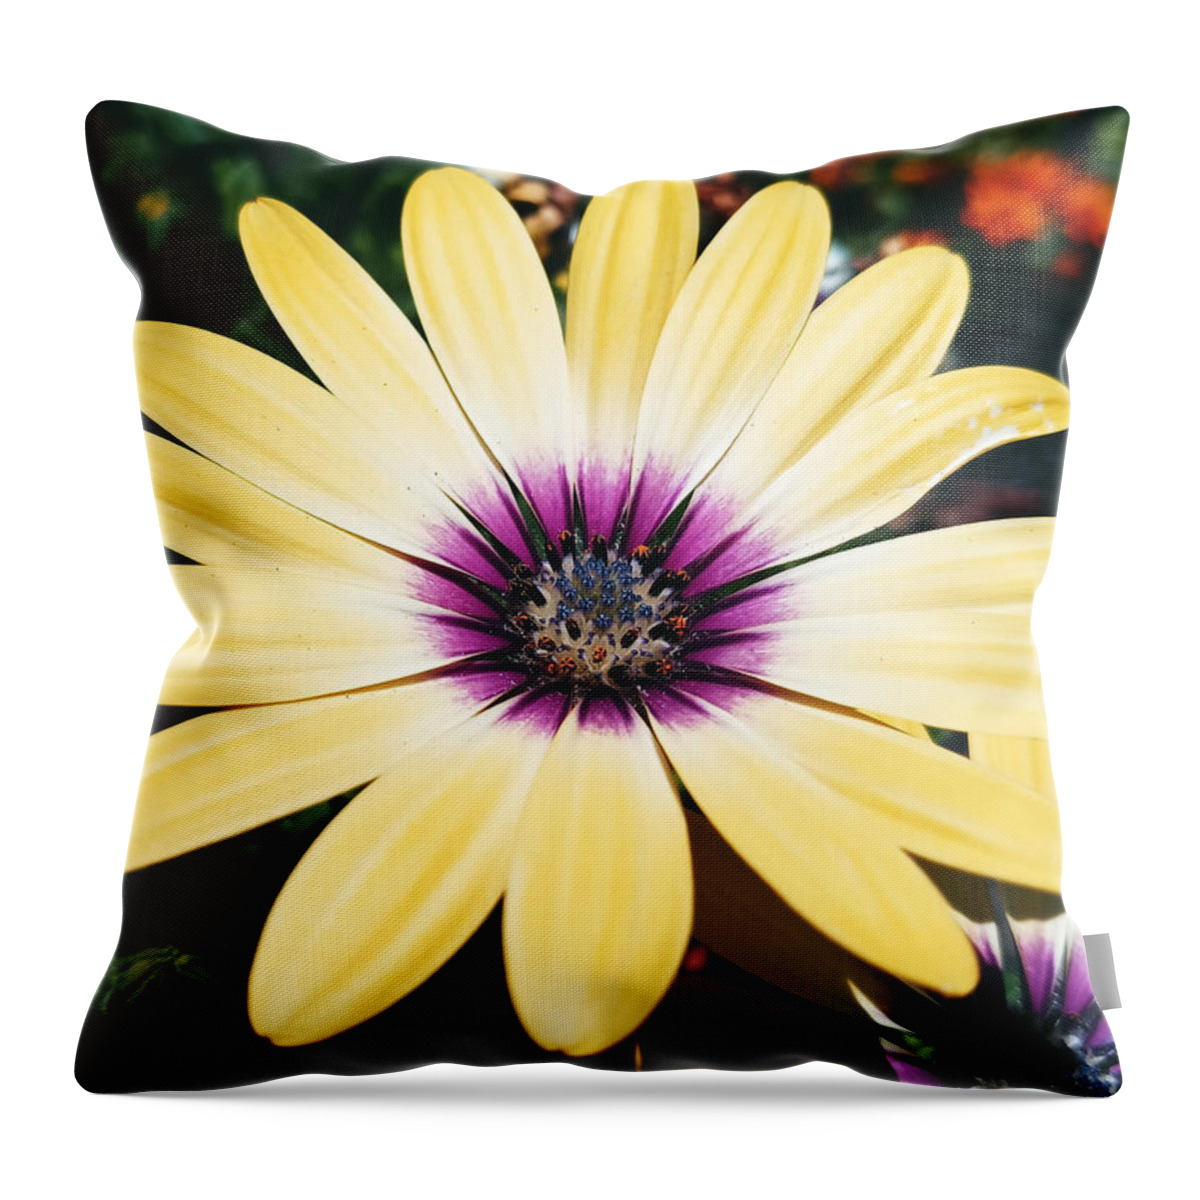 Flower Throw Pillow featuring the photograph Pretty Eyed Flower by Dani McEvoy